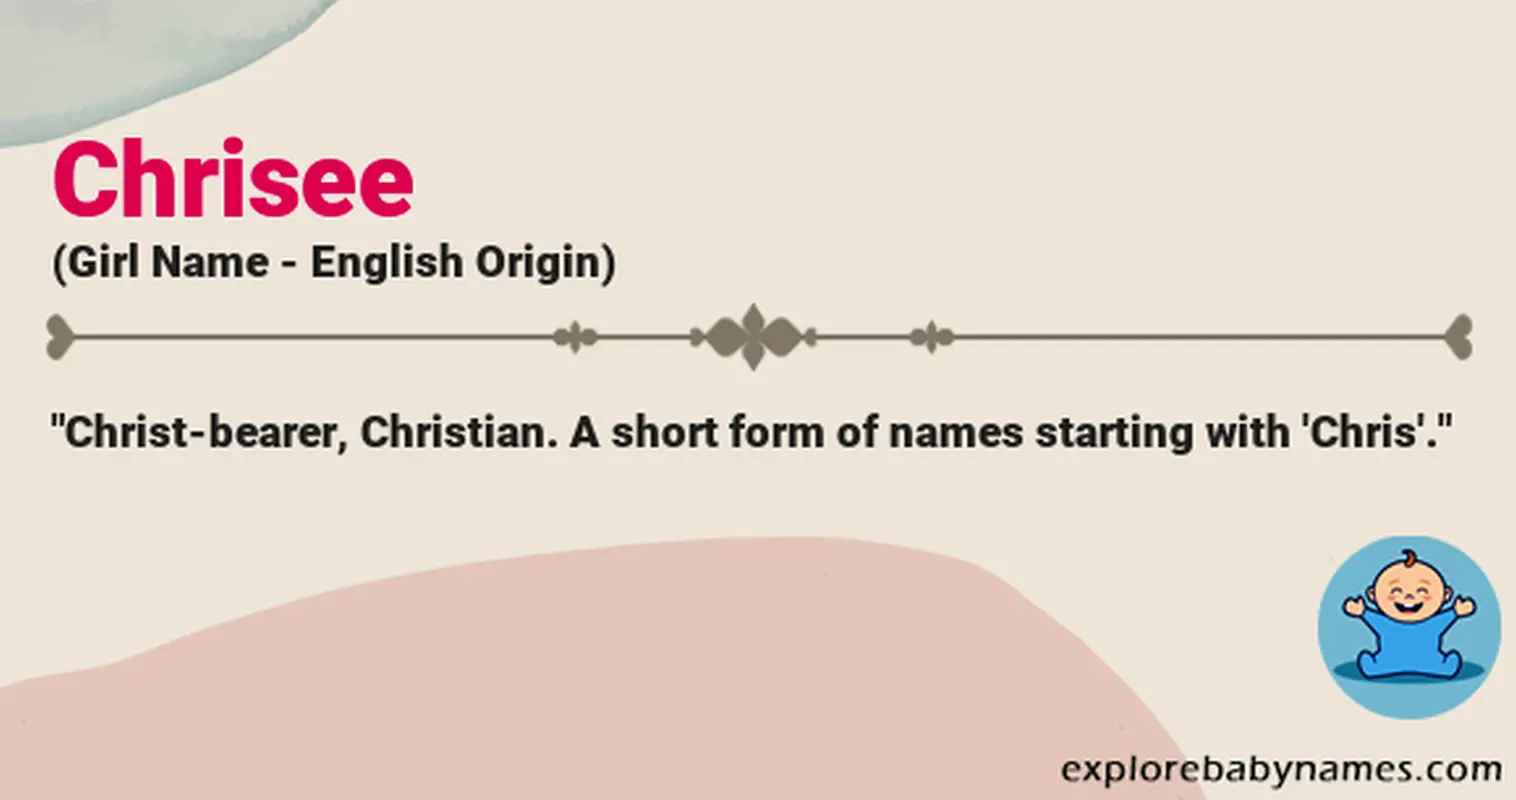 Meaning of Chrisee